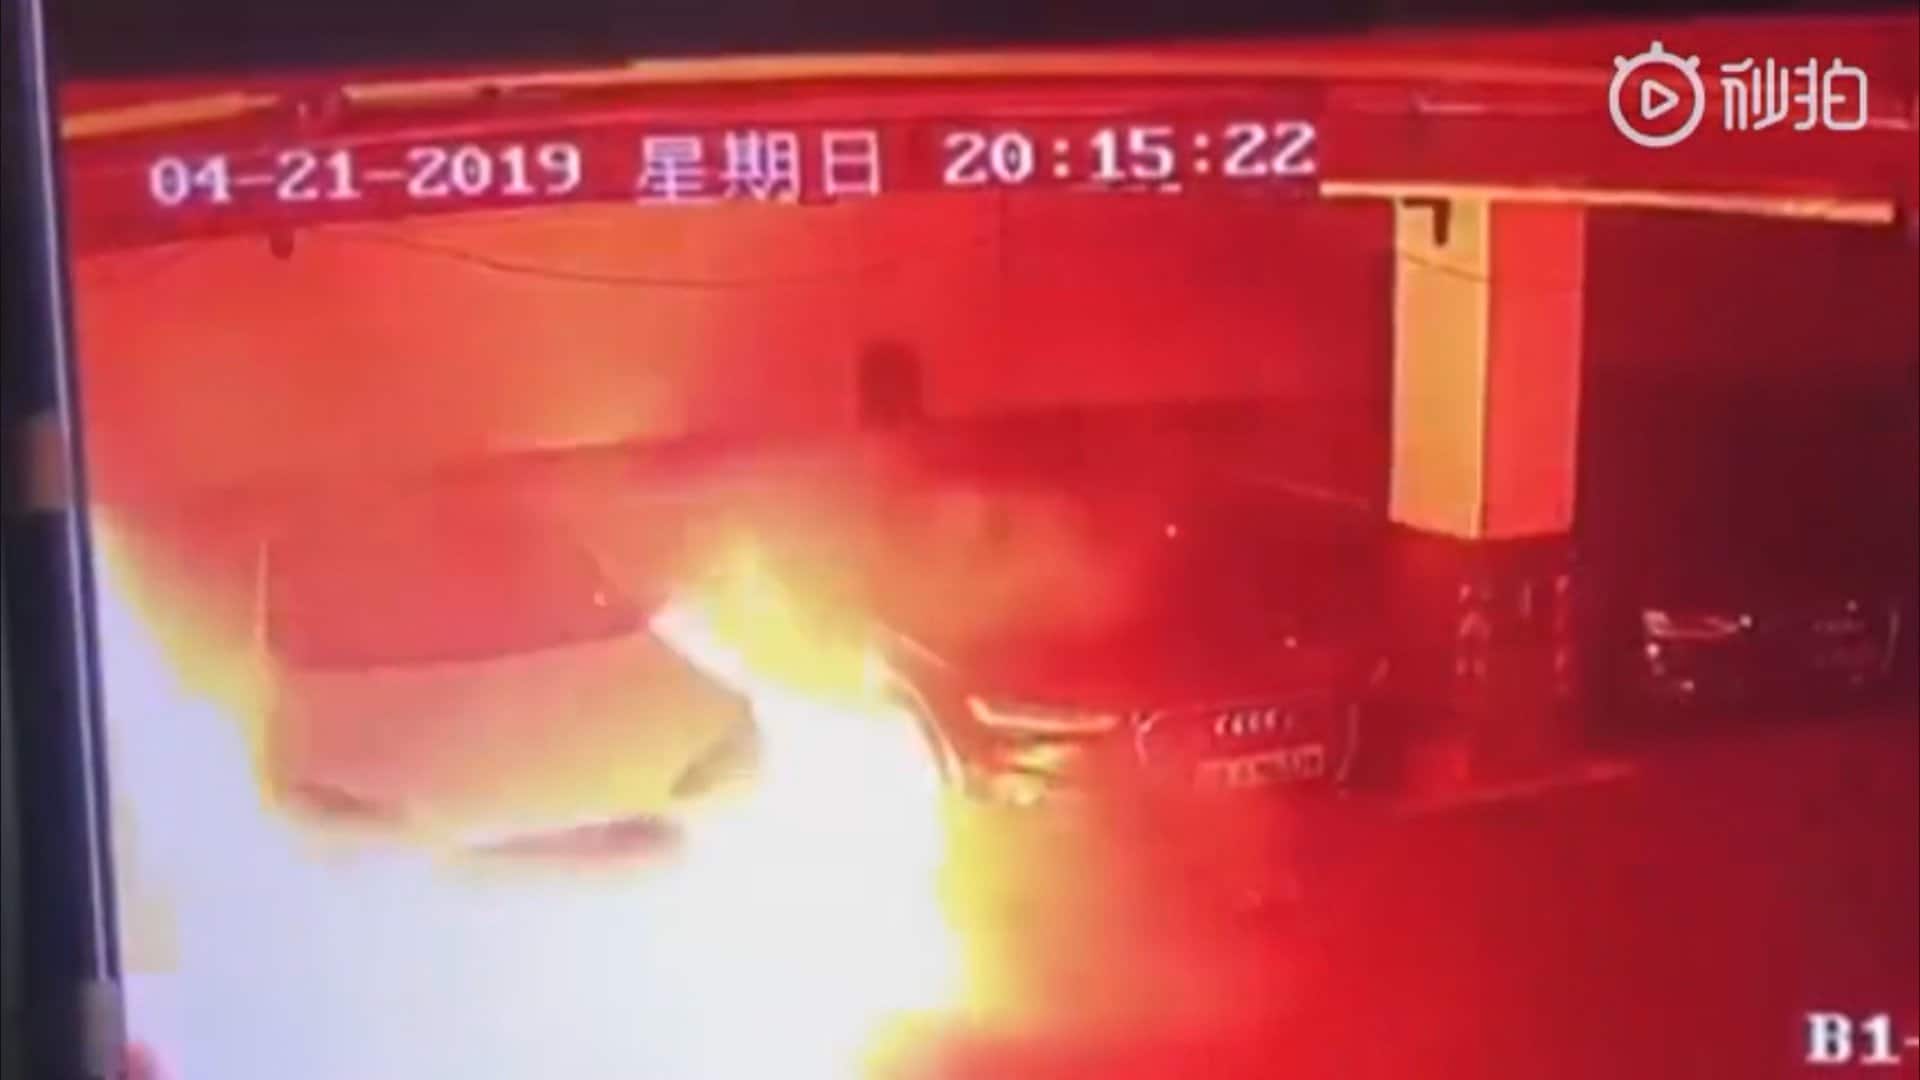 How Tesla can recover from the Model S explosion in Shanghai - Video - BNN1920 x 1080